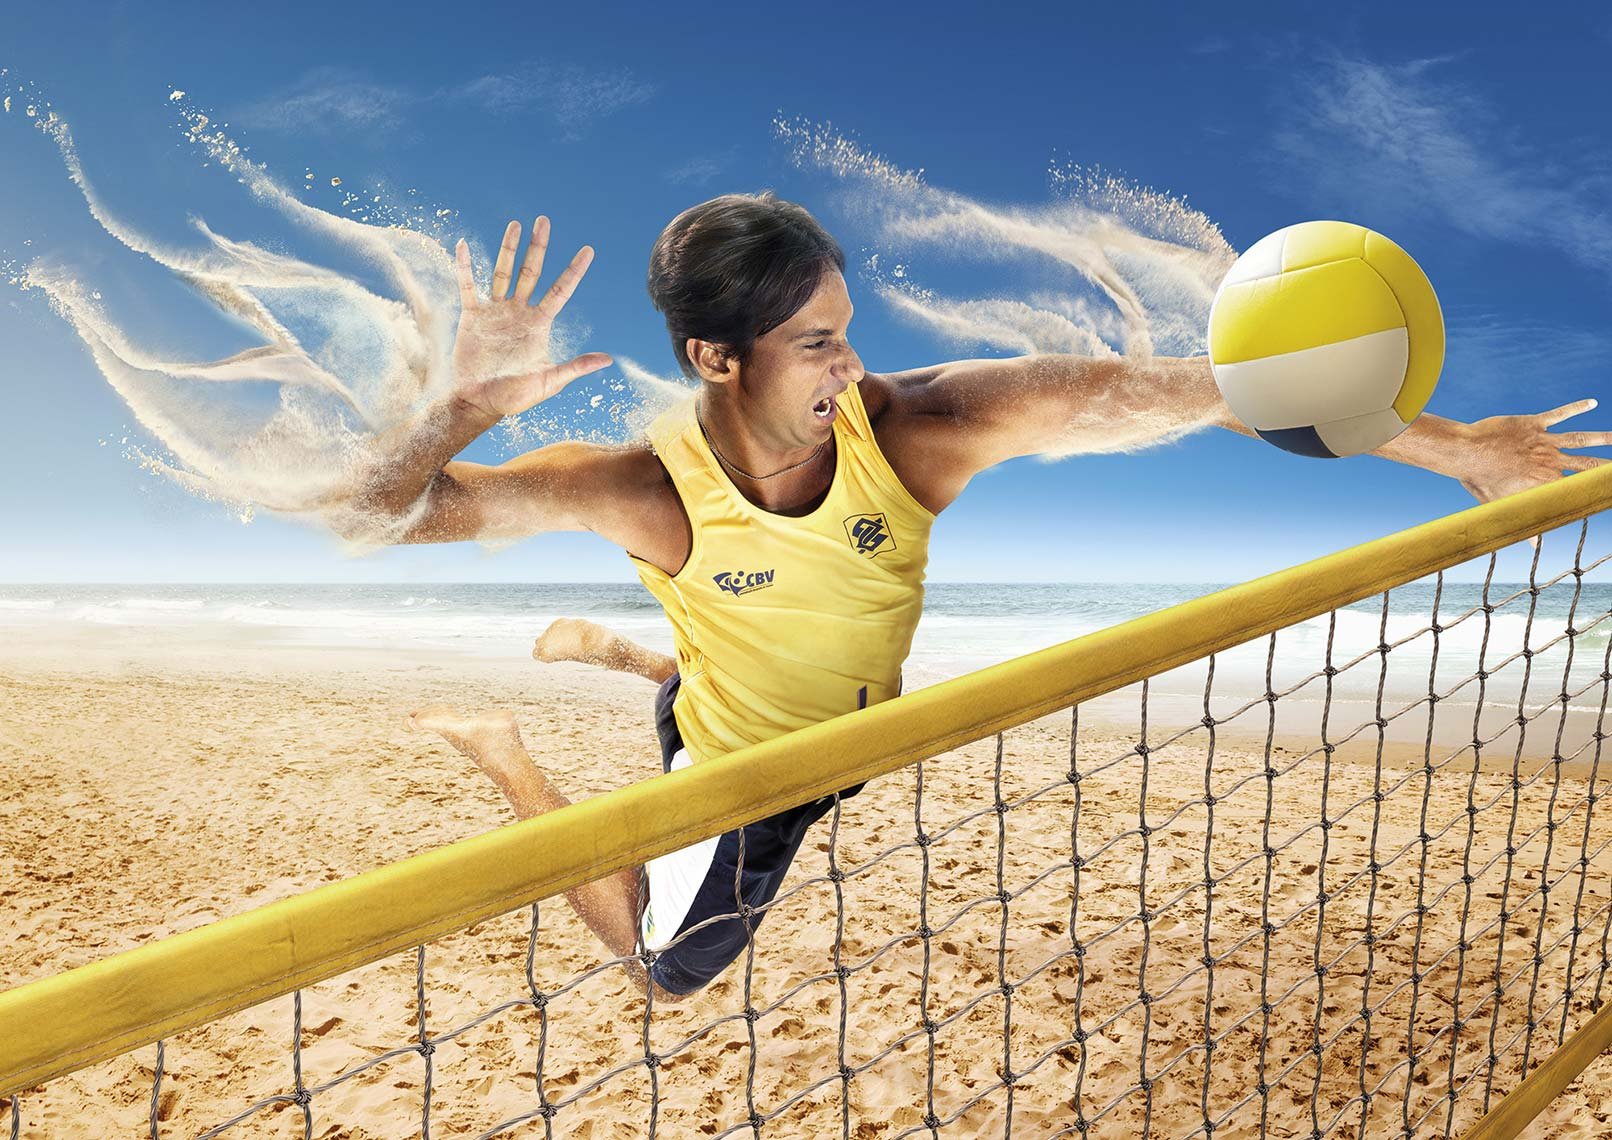 Volley ball player image